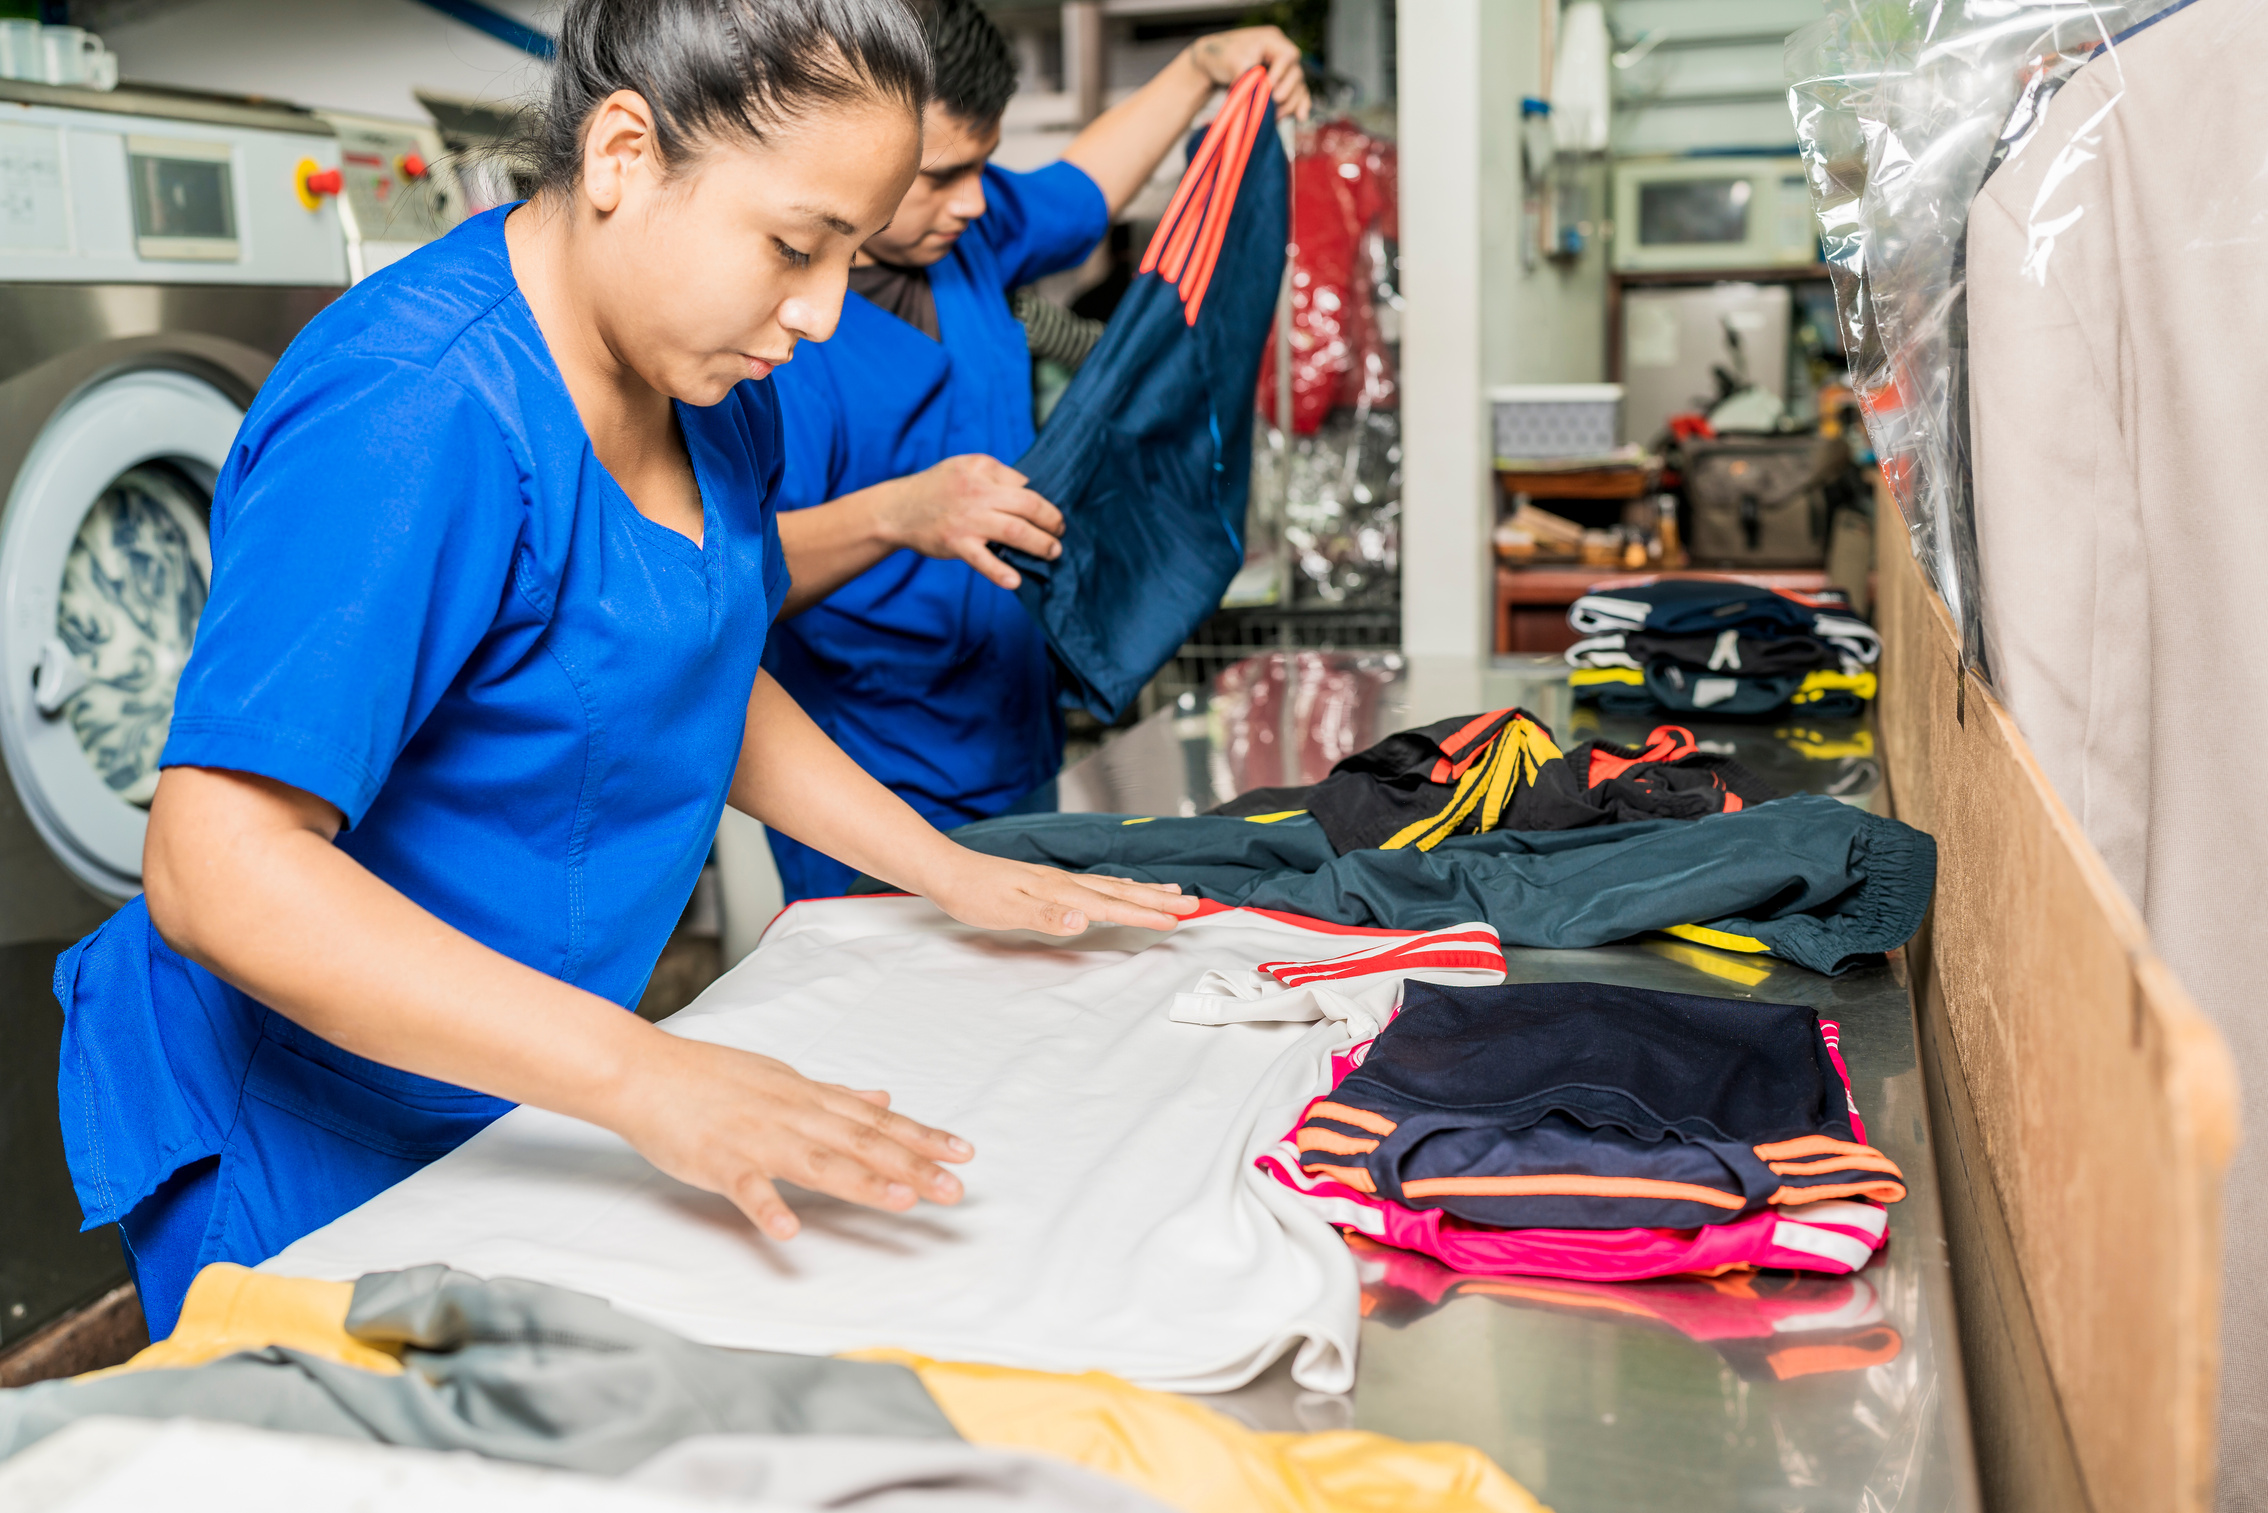 Workers in Uniform Folding Clothes in a Laundry Service